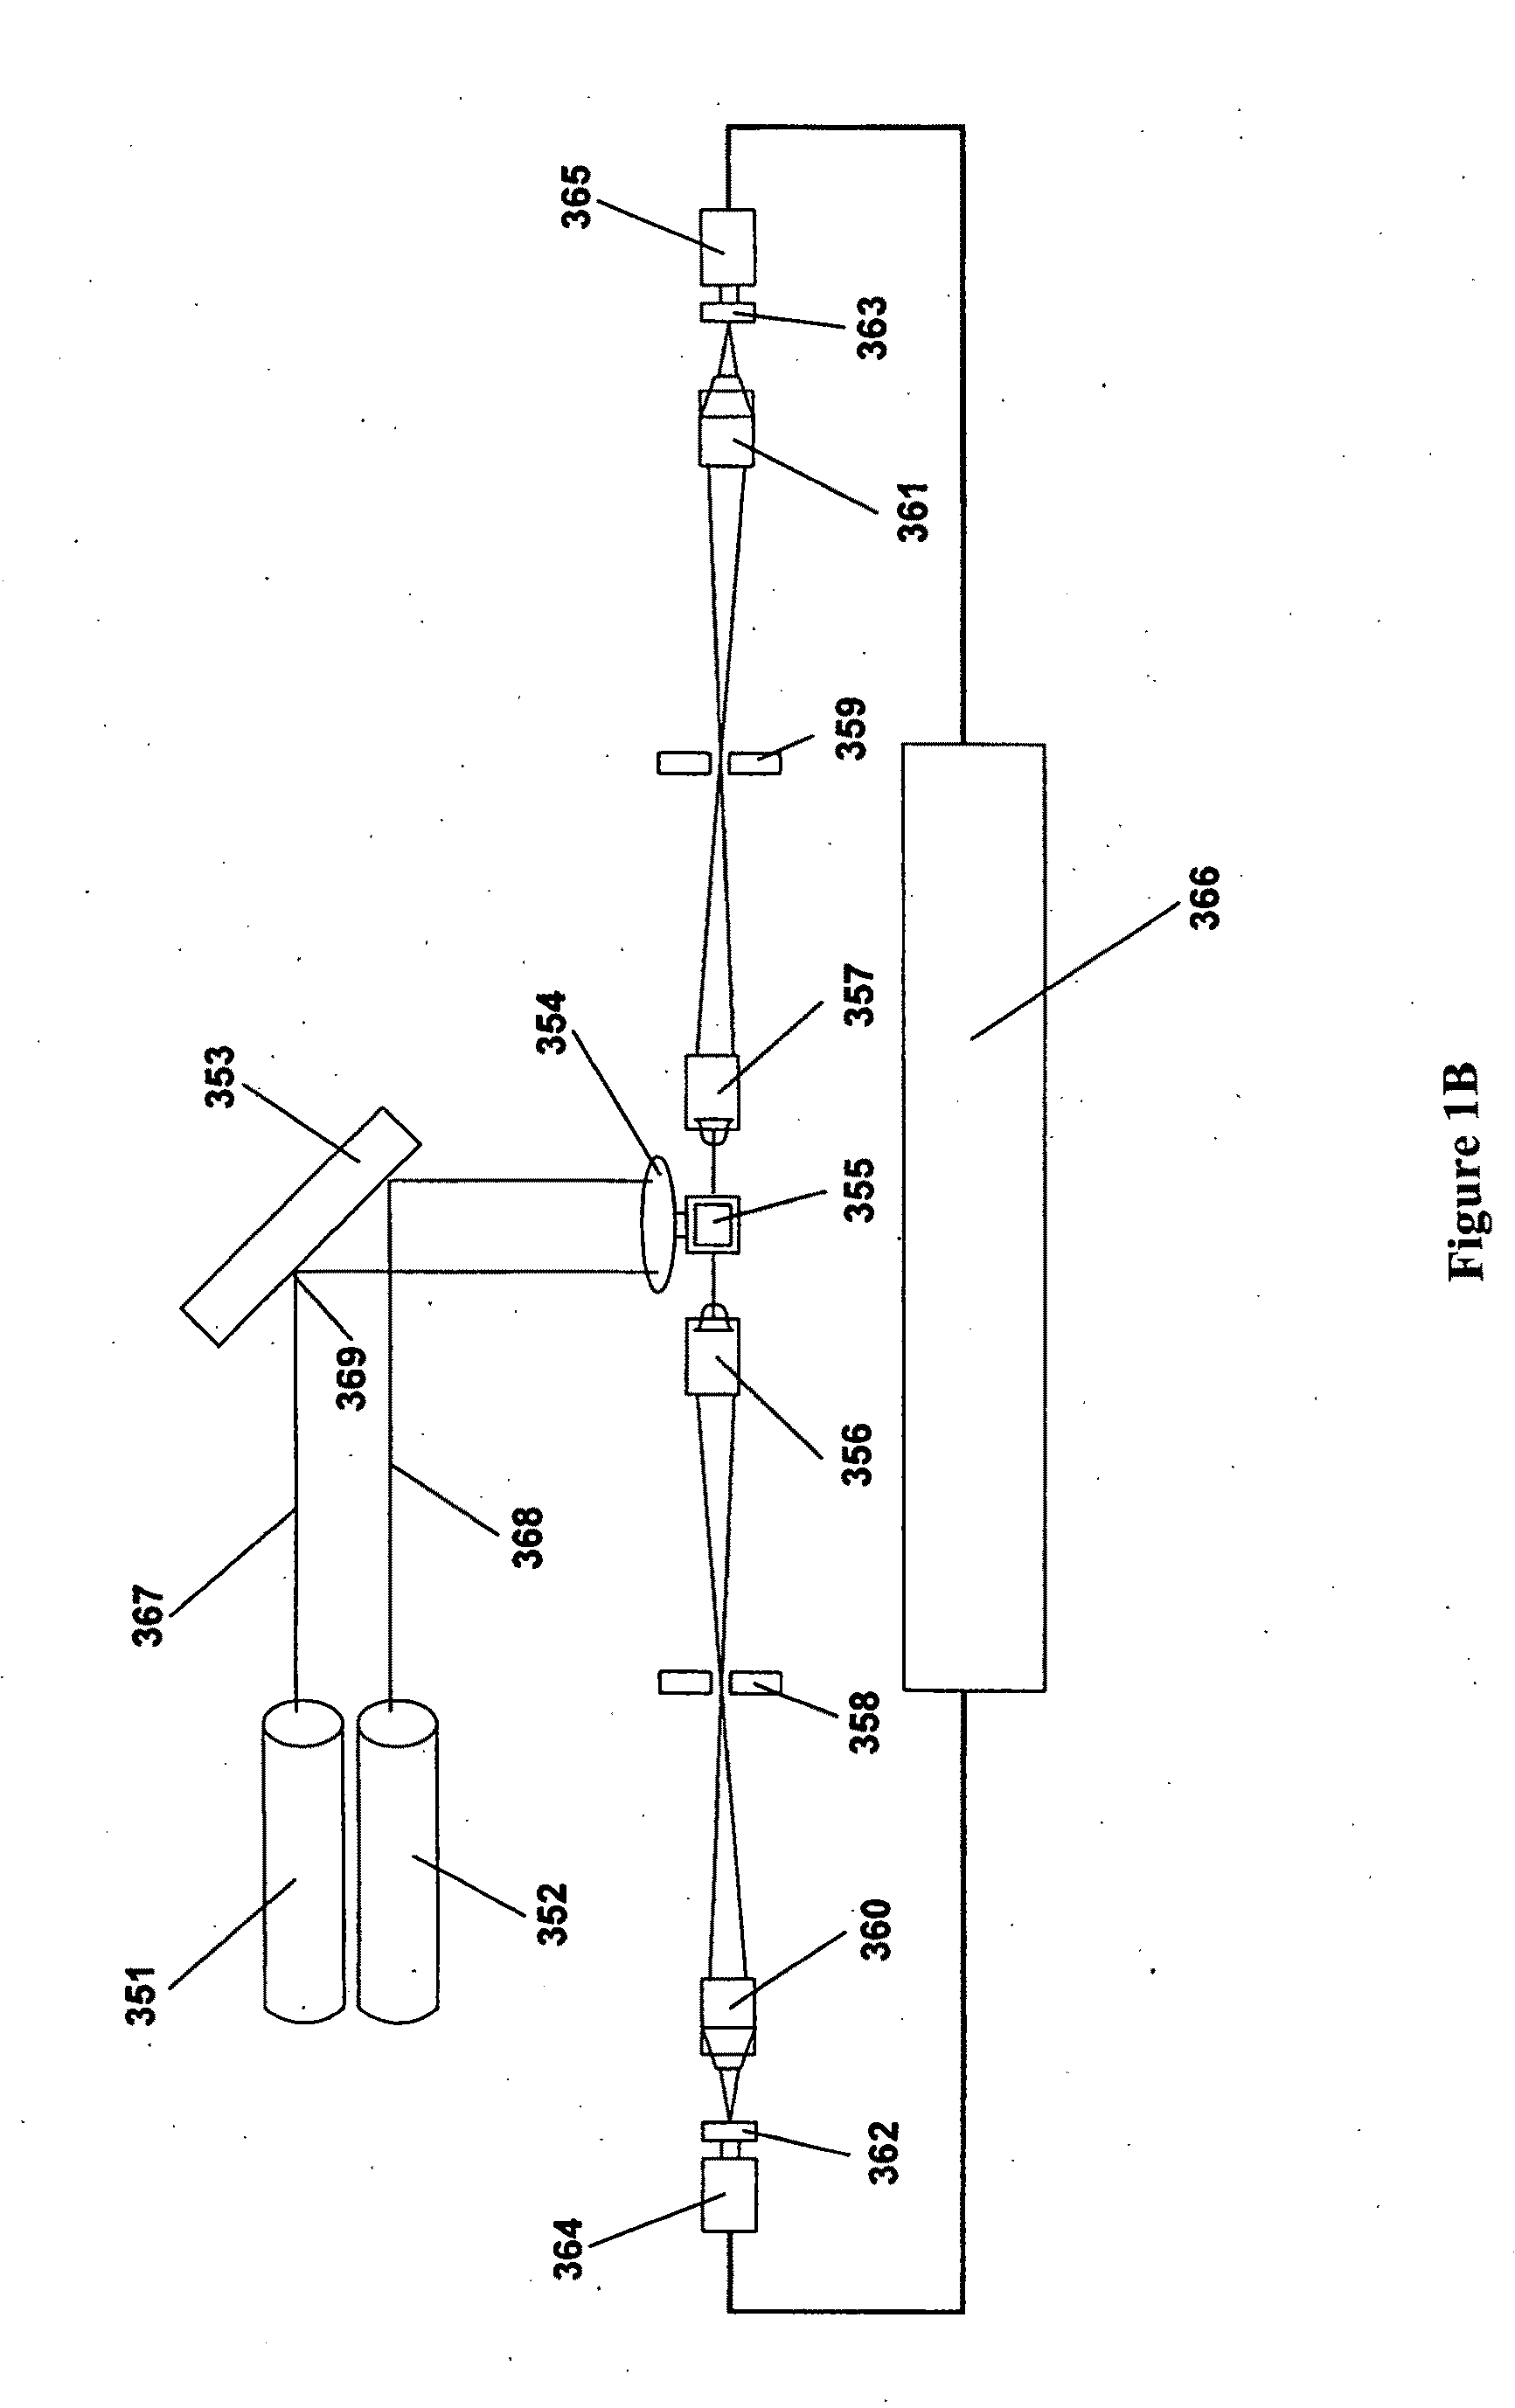 Highly sensitive system and methods for analysis of troponin